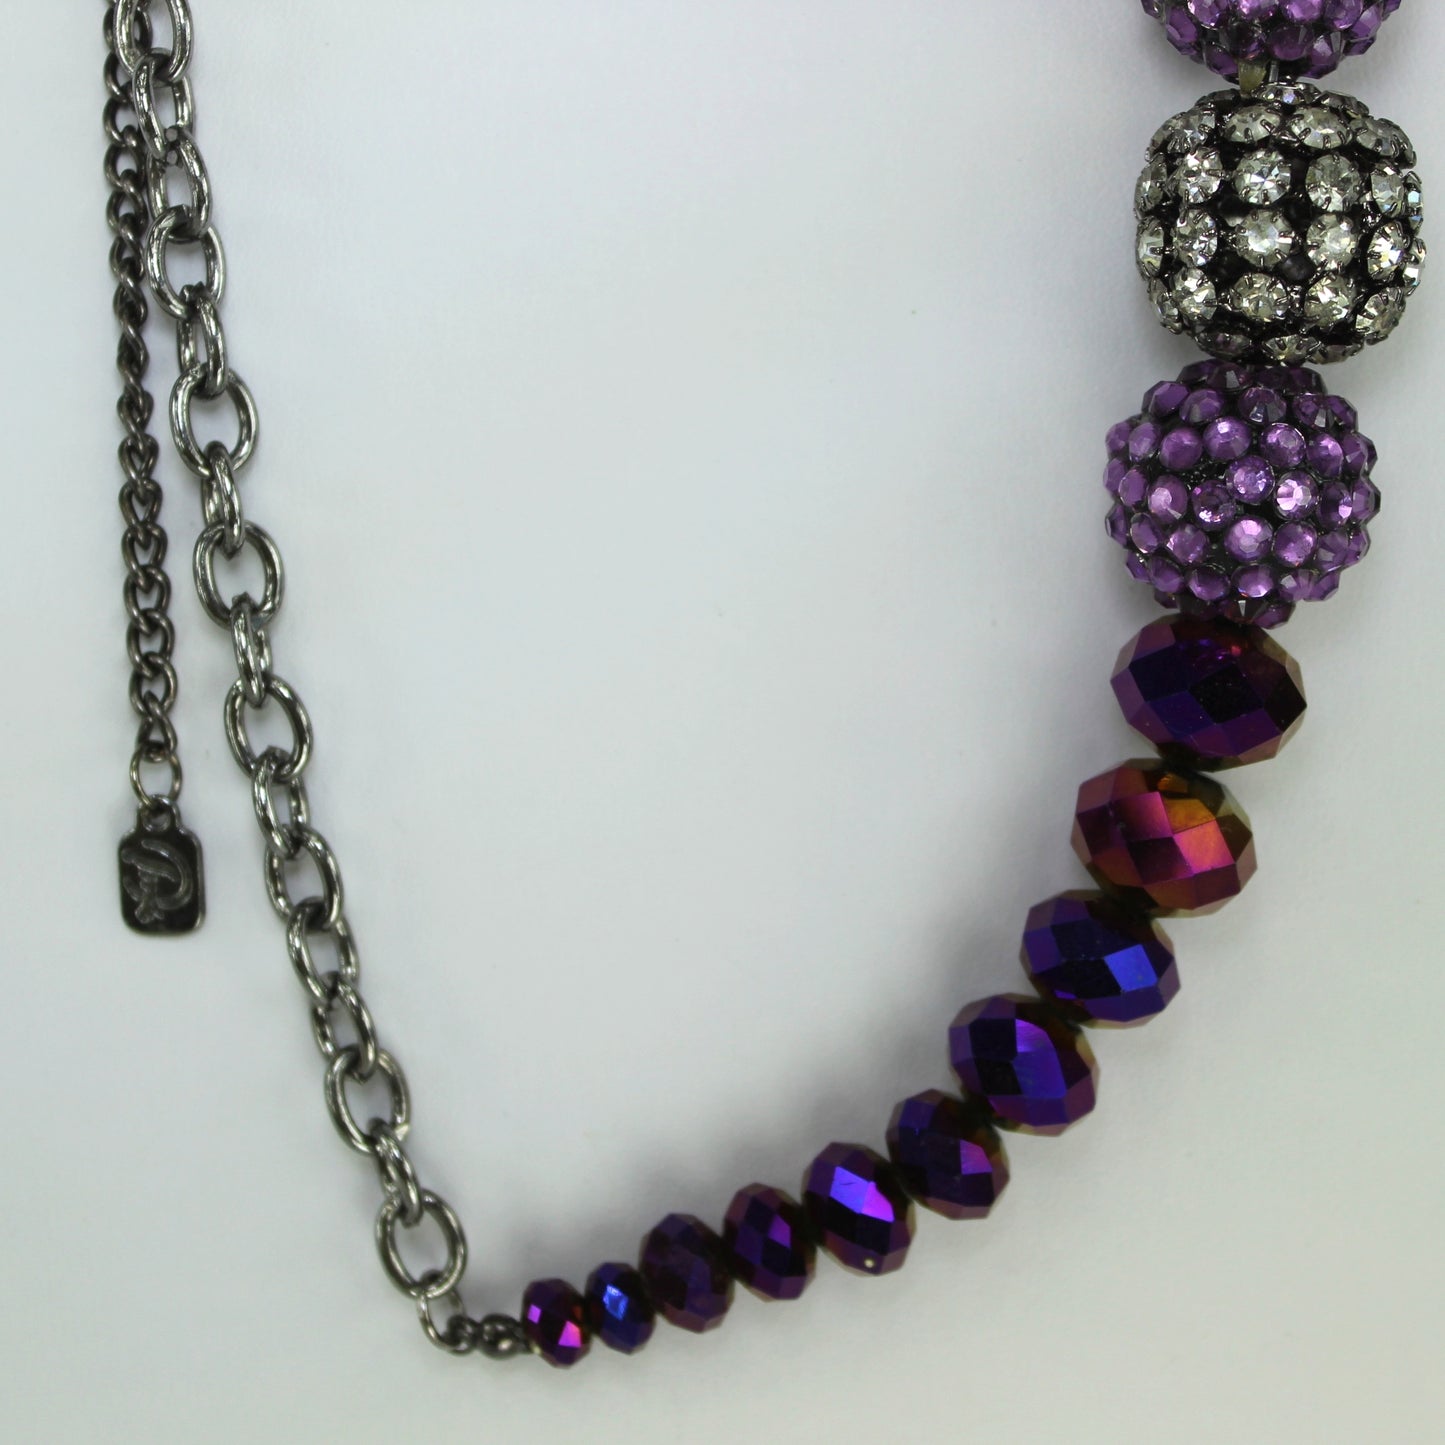 Designed signed Necklace Amethyst Crystal & Iridescent Cut Beads Alive with Sparkle cut heavy glass iridescent beads